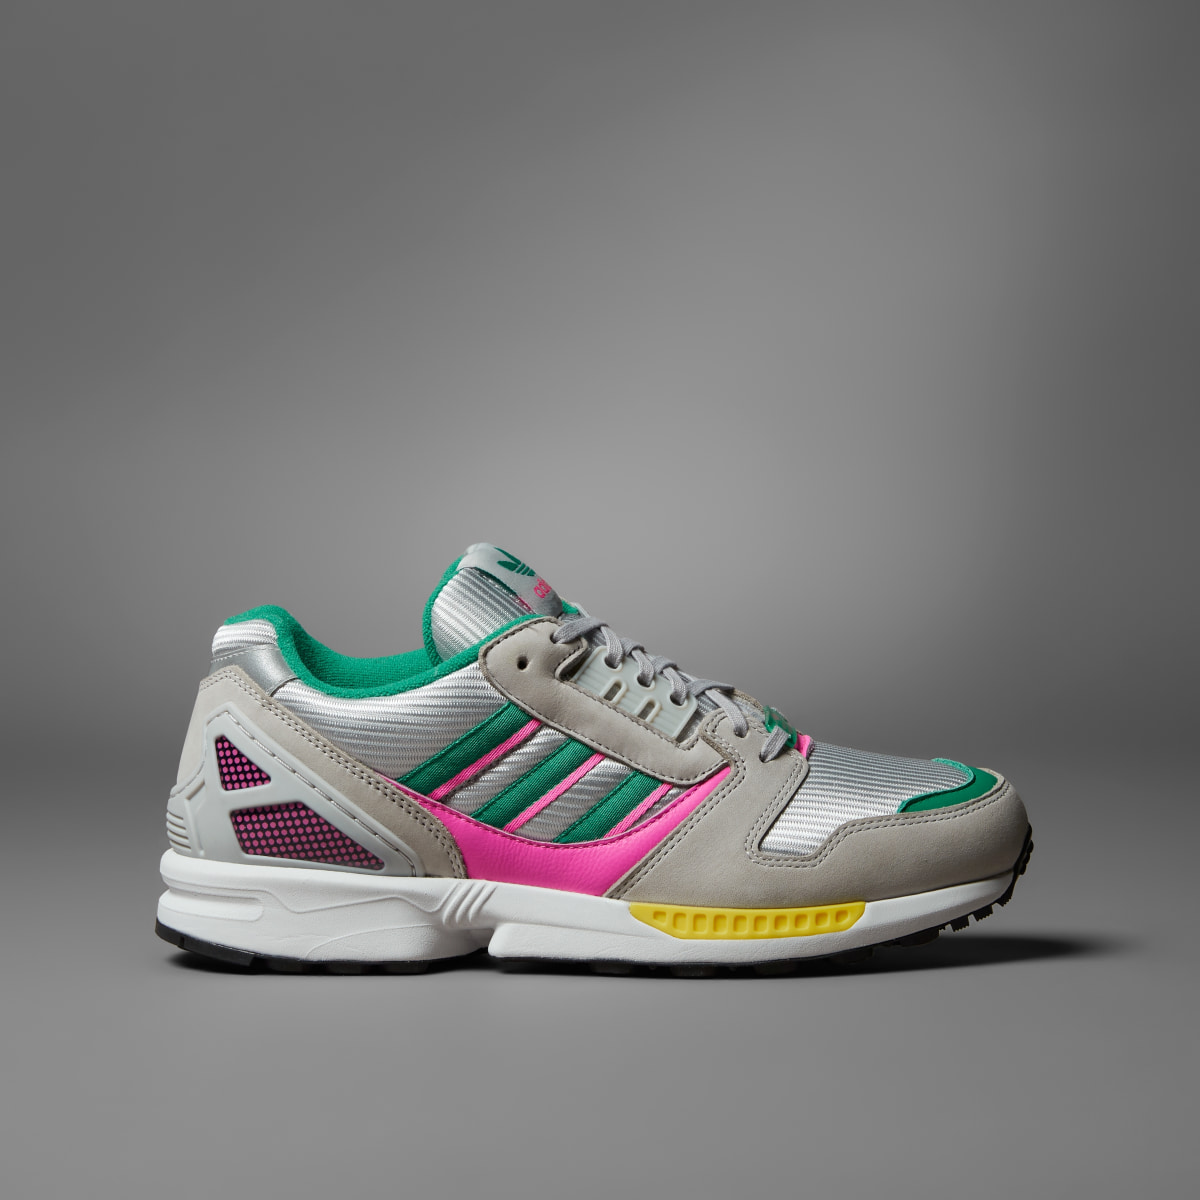 Adidas ZX 8000 Shoes. 4